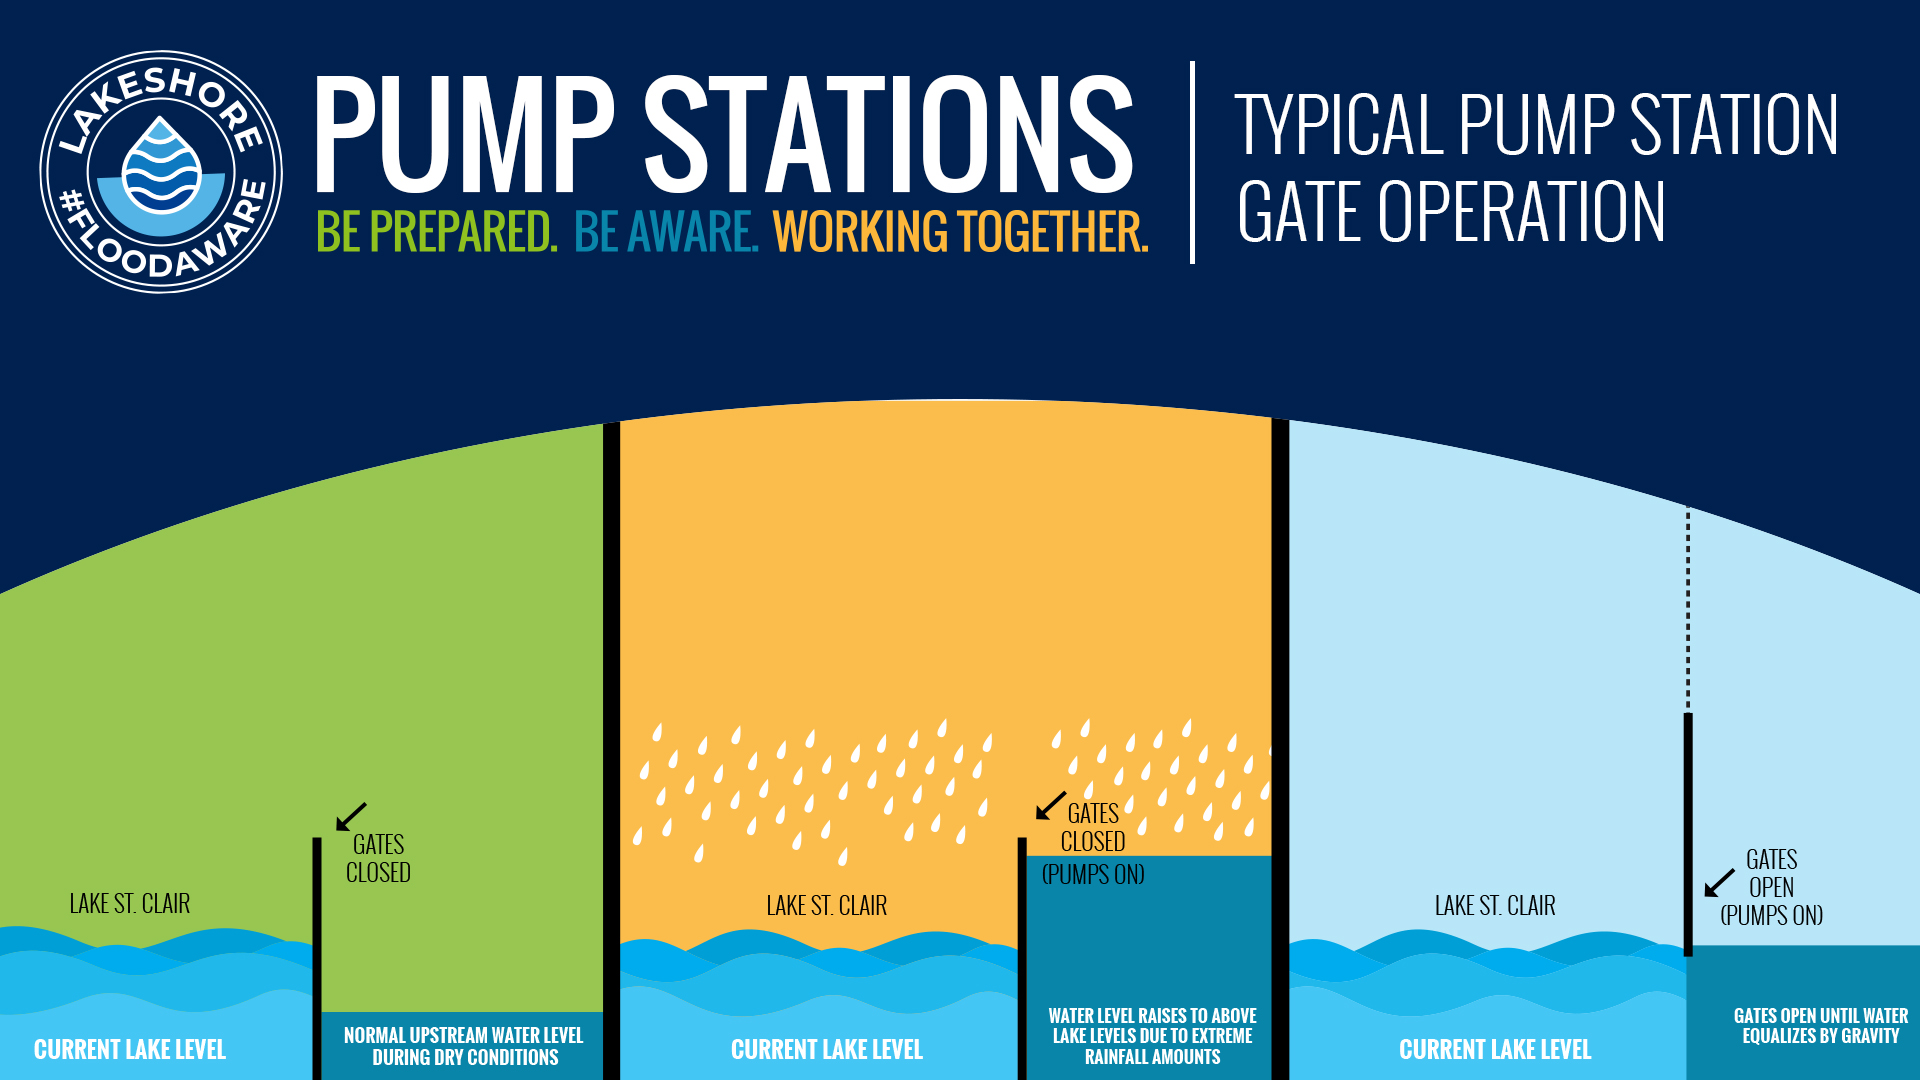 Typical pump station gate operation